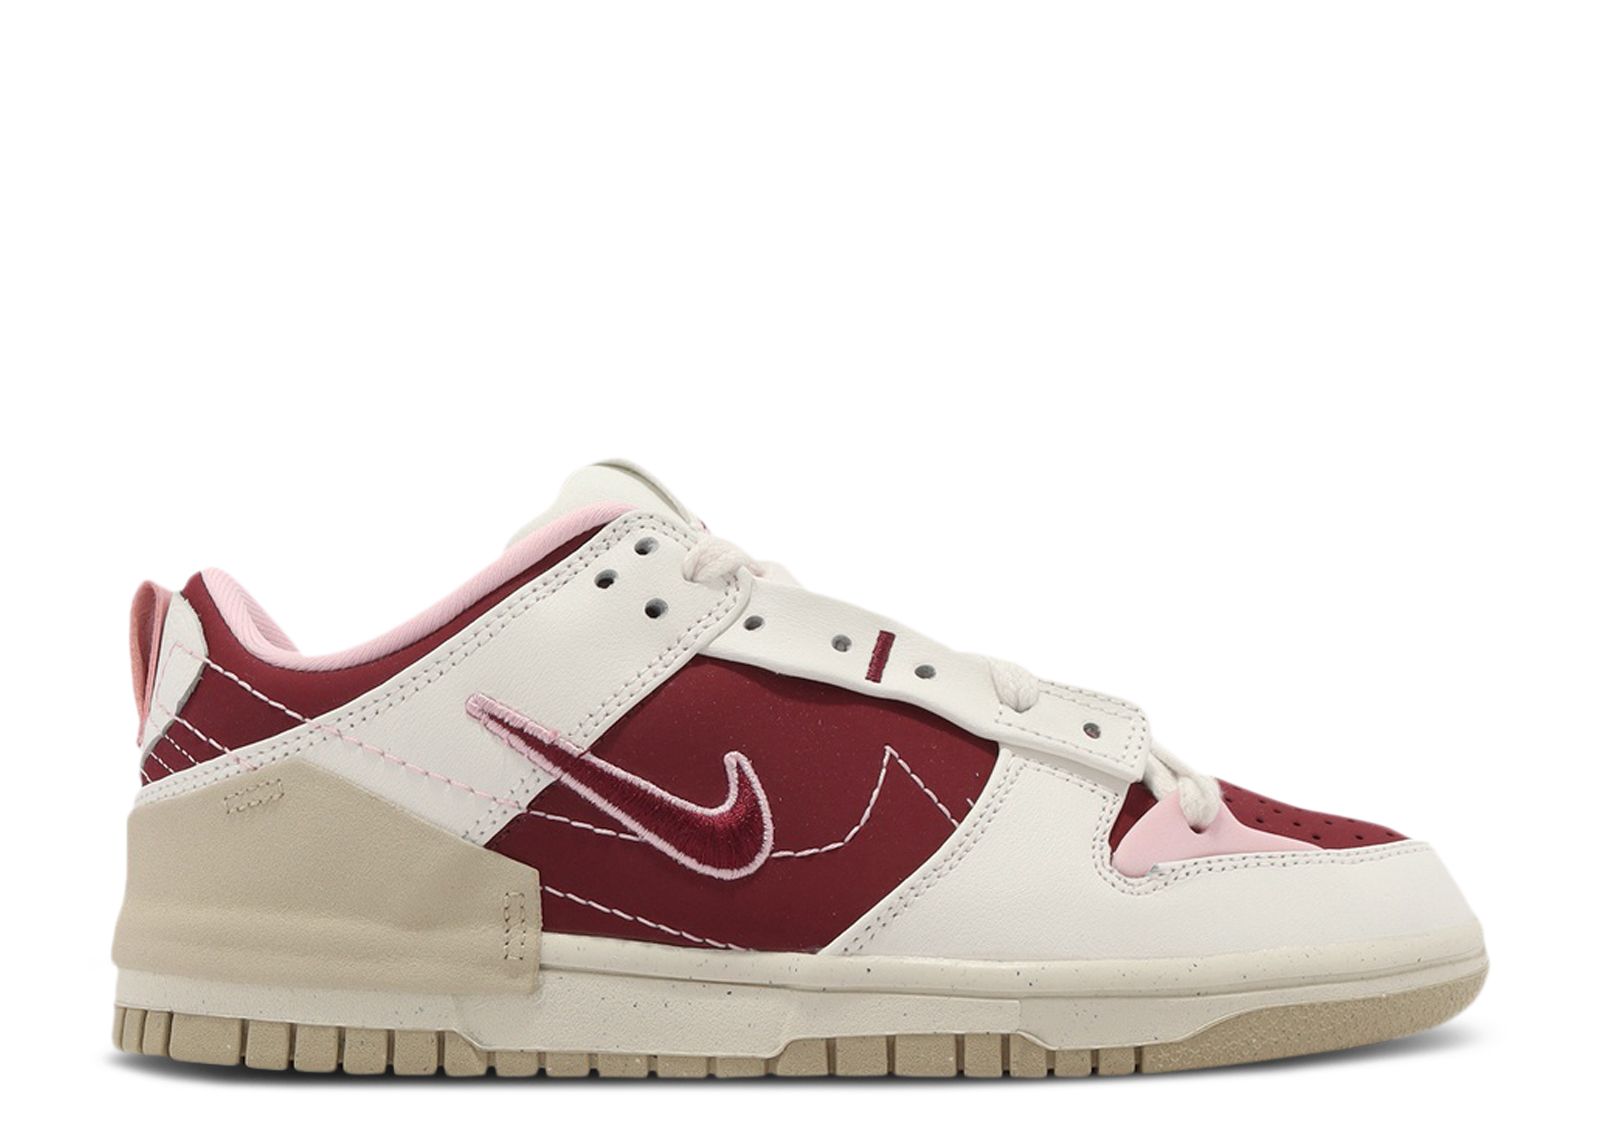 Wmns Dunk Low Disrupt 2 'Valentine's Day' - Nike - FD4617 667